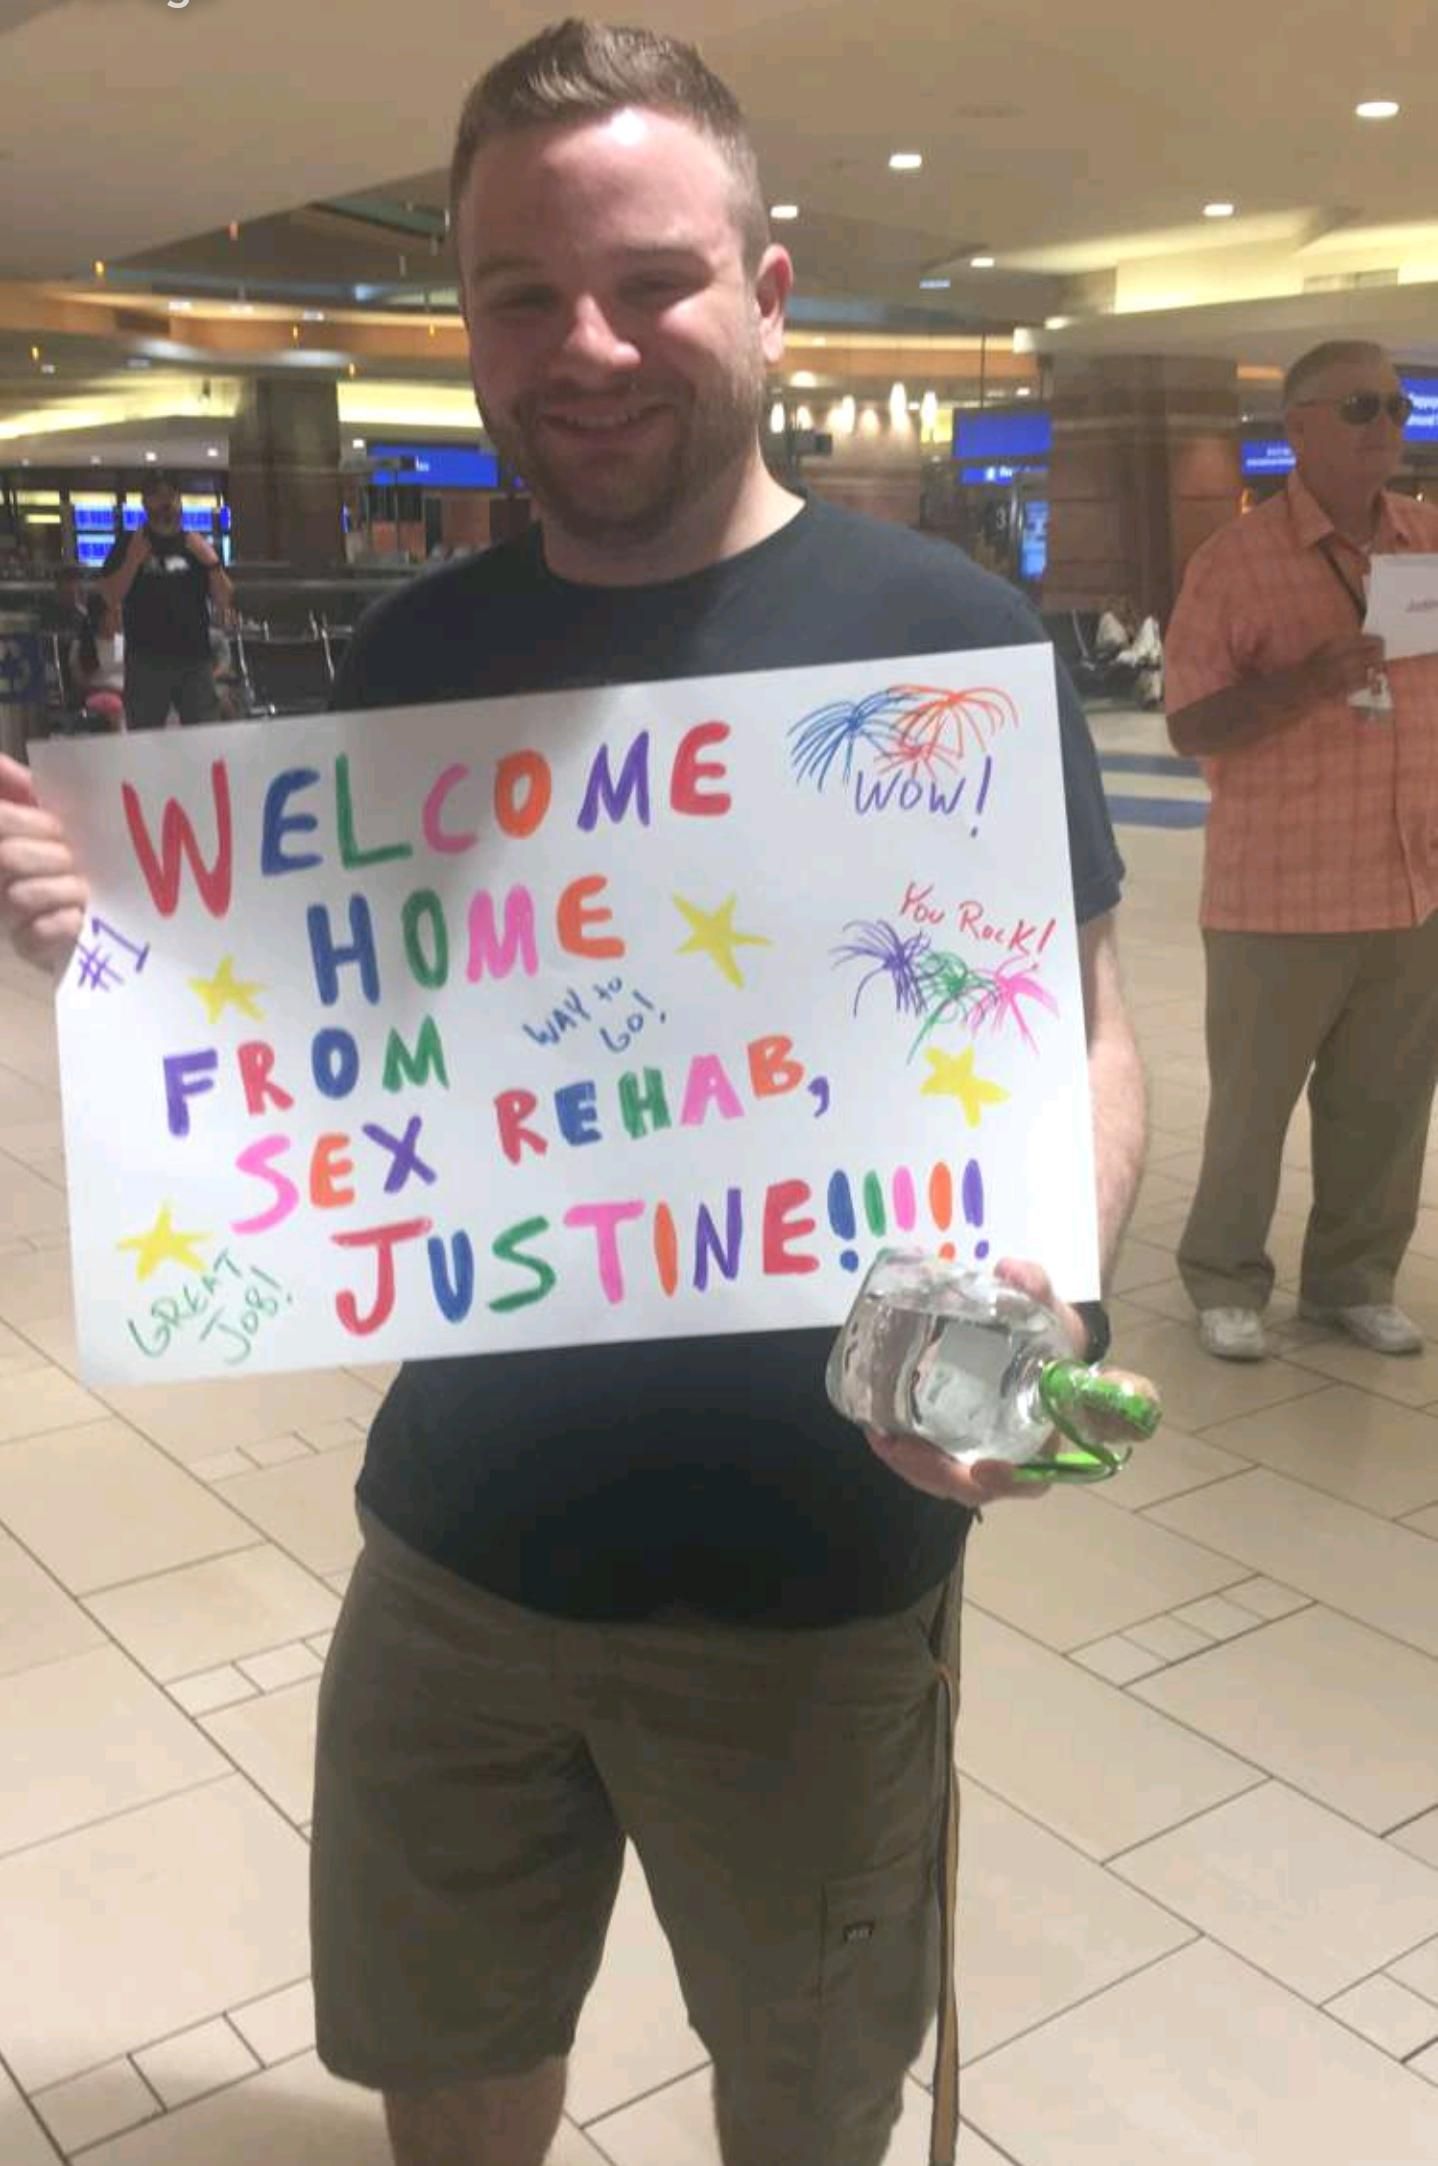 How I welcomed my friend at the airport